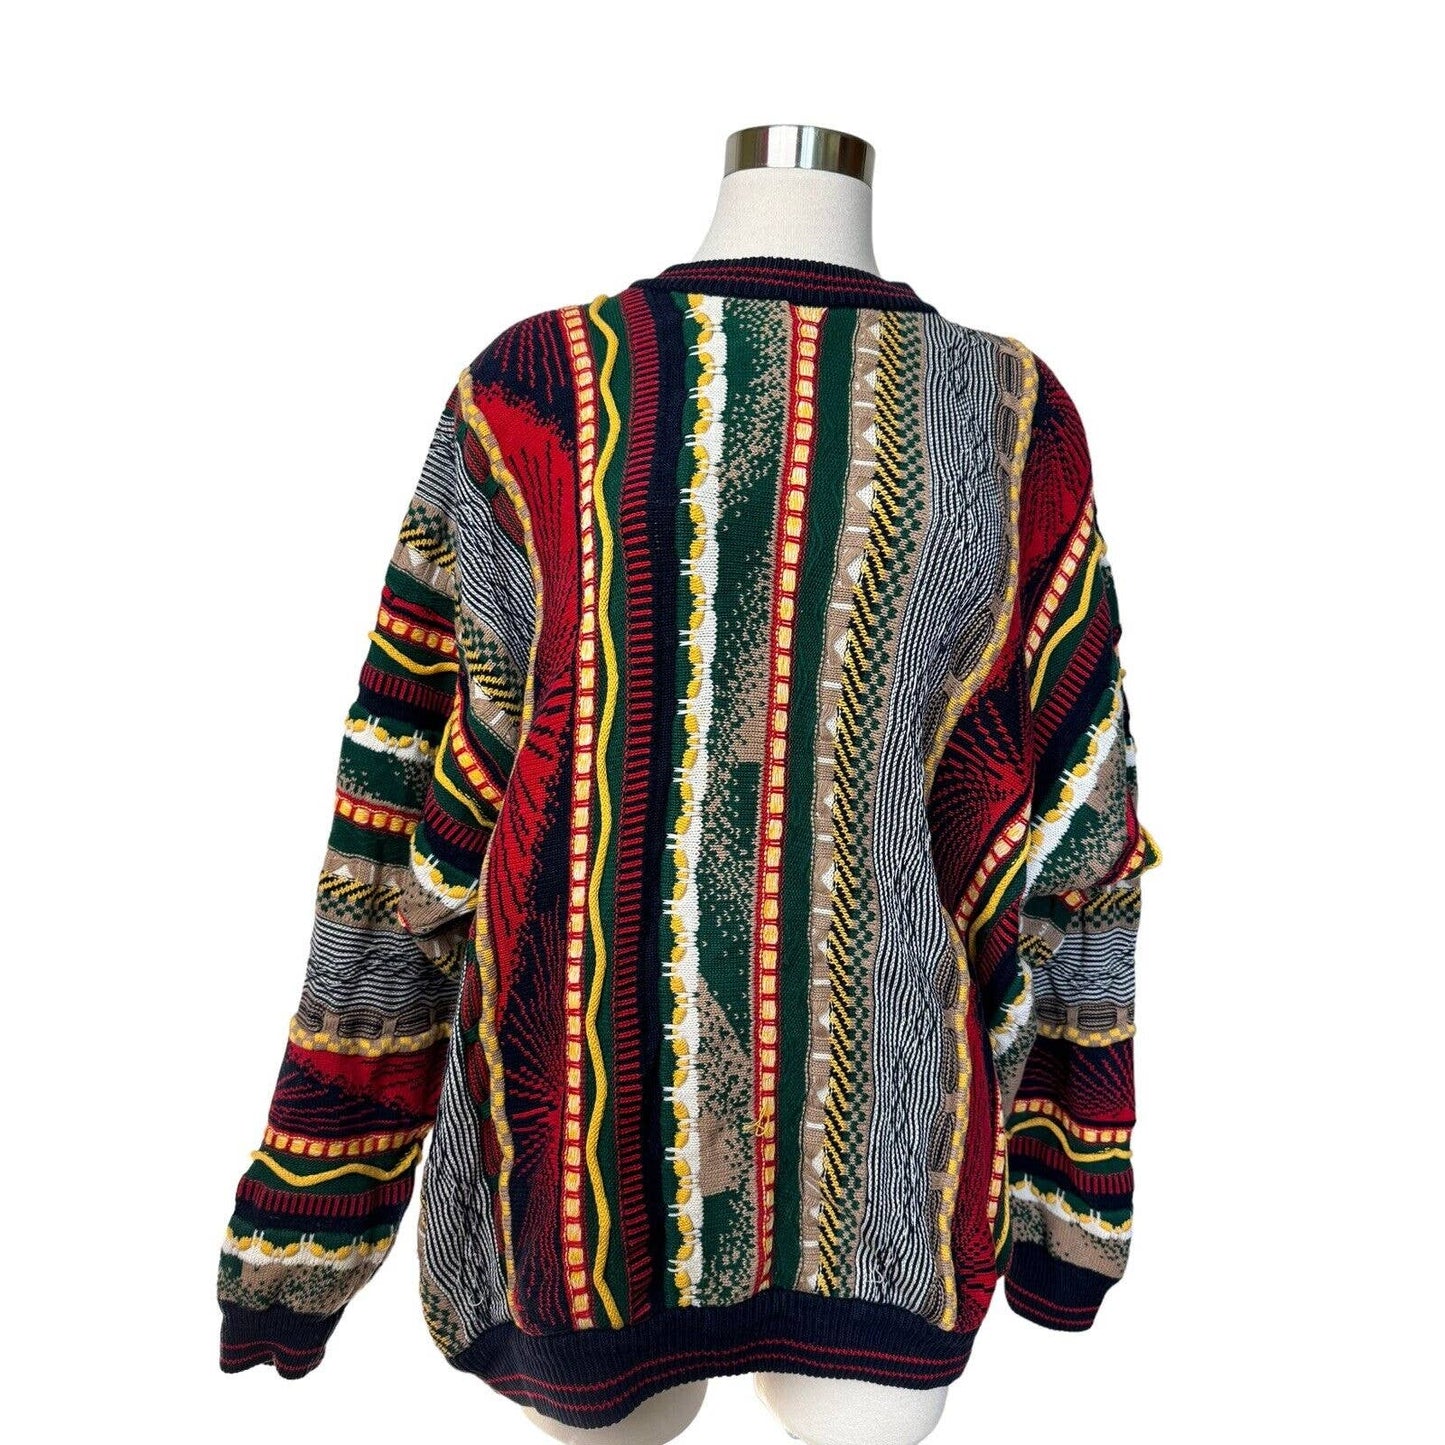 CoogiCoogi Mens Sweater -Missing Tag- Cotton Colorful - XL/XXL - Black Dog Vintage